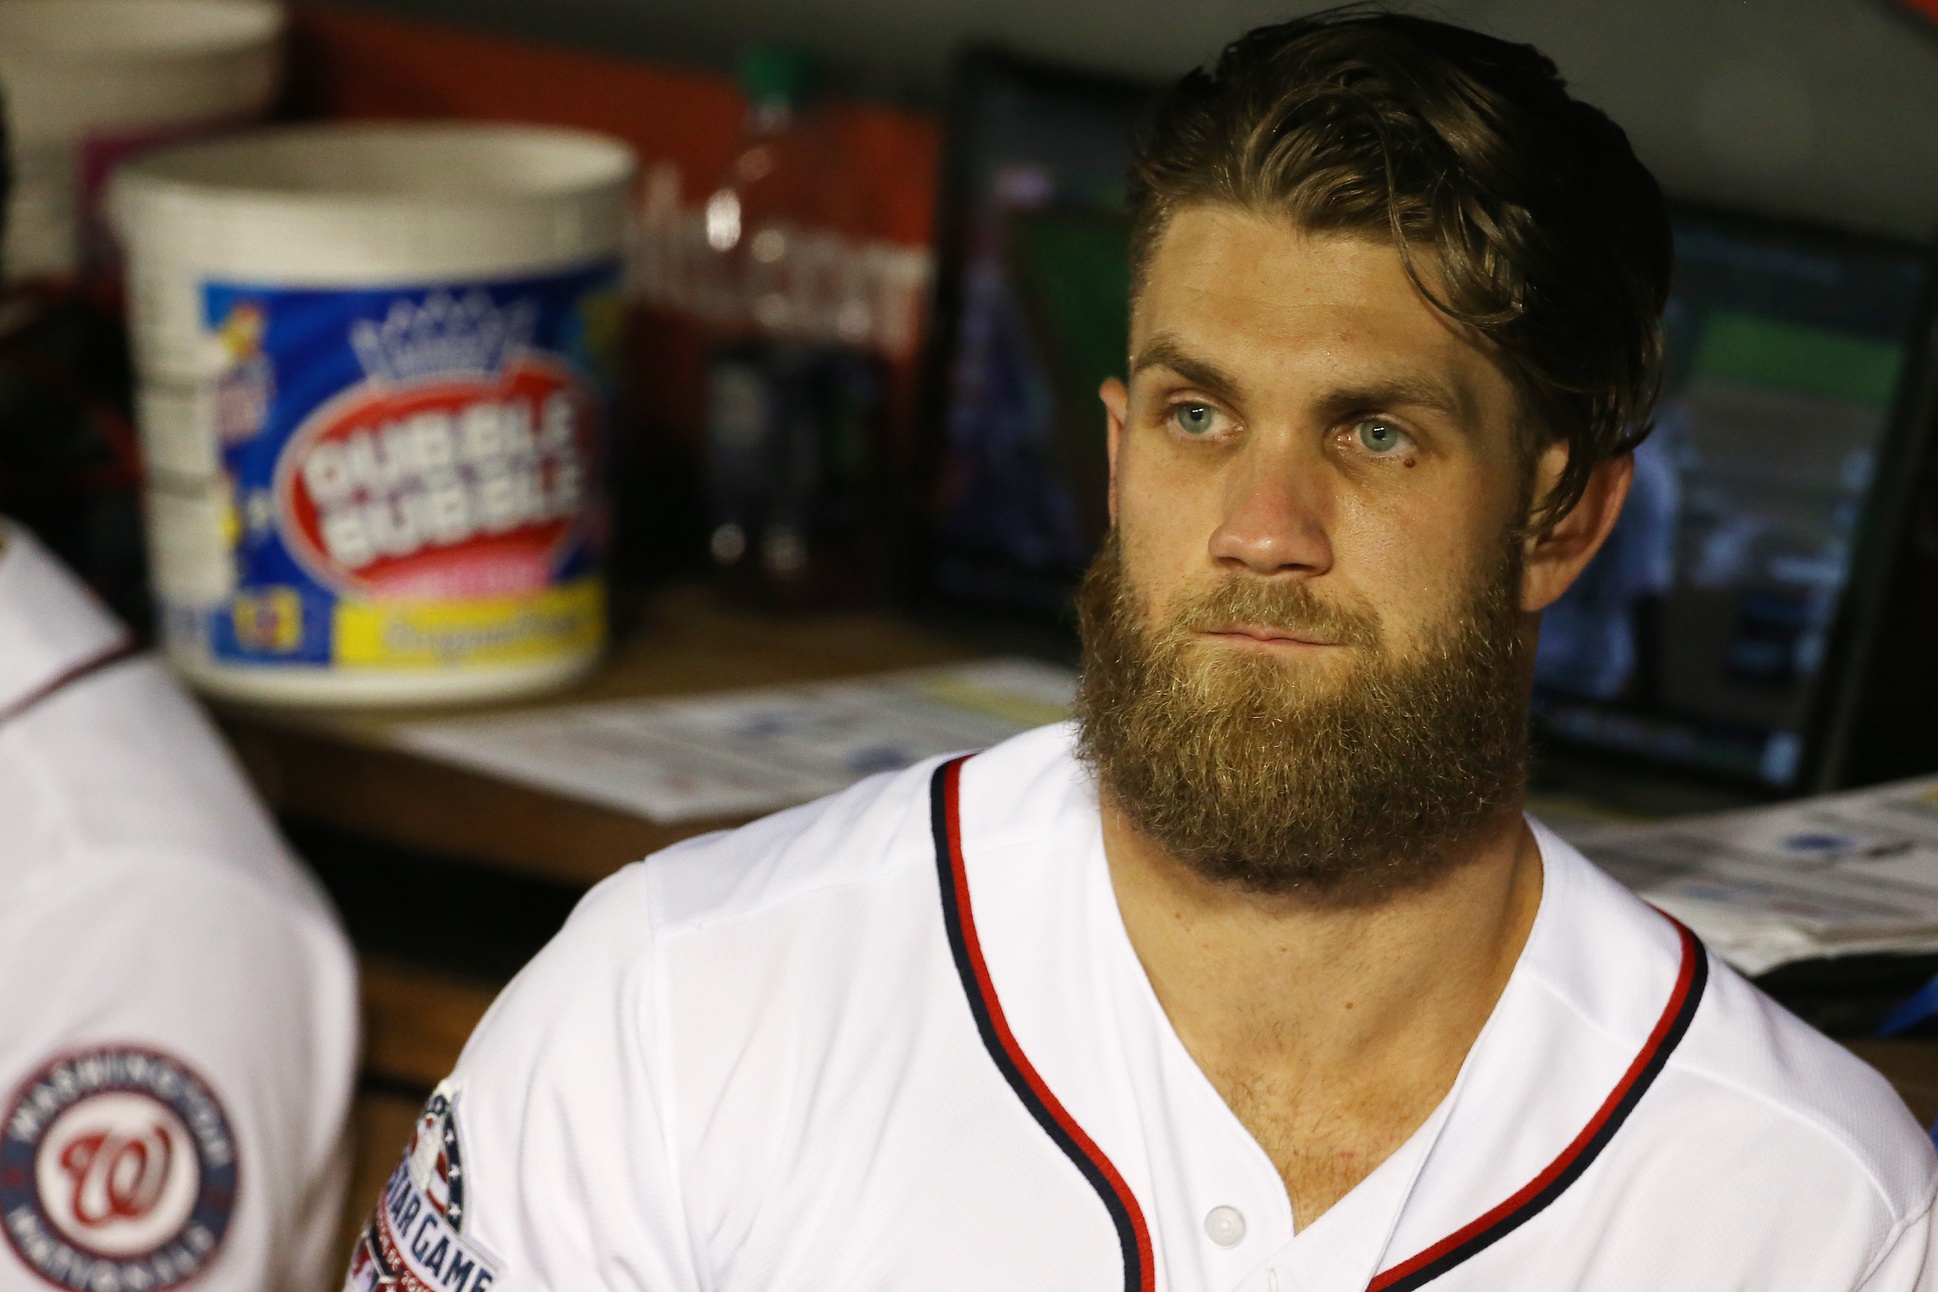 With “Remote” Chance of Signing Bryce Harper, Should the Phillies Pivot to the Mound?